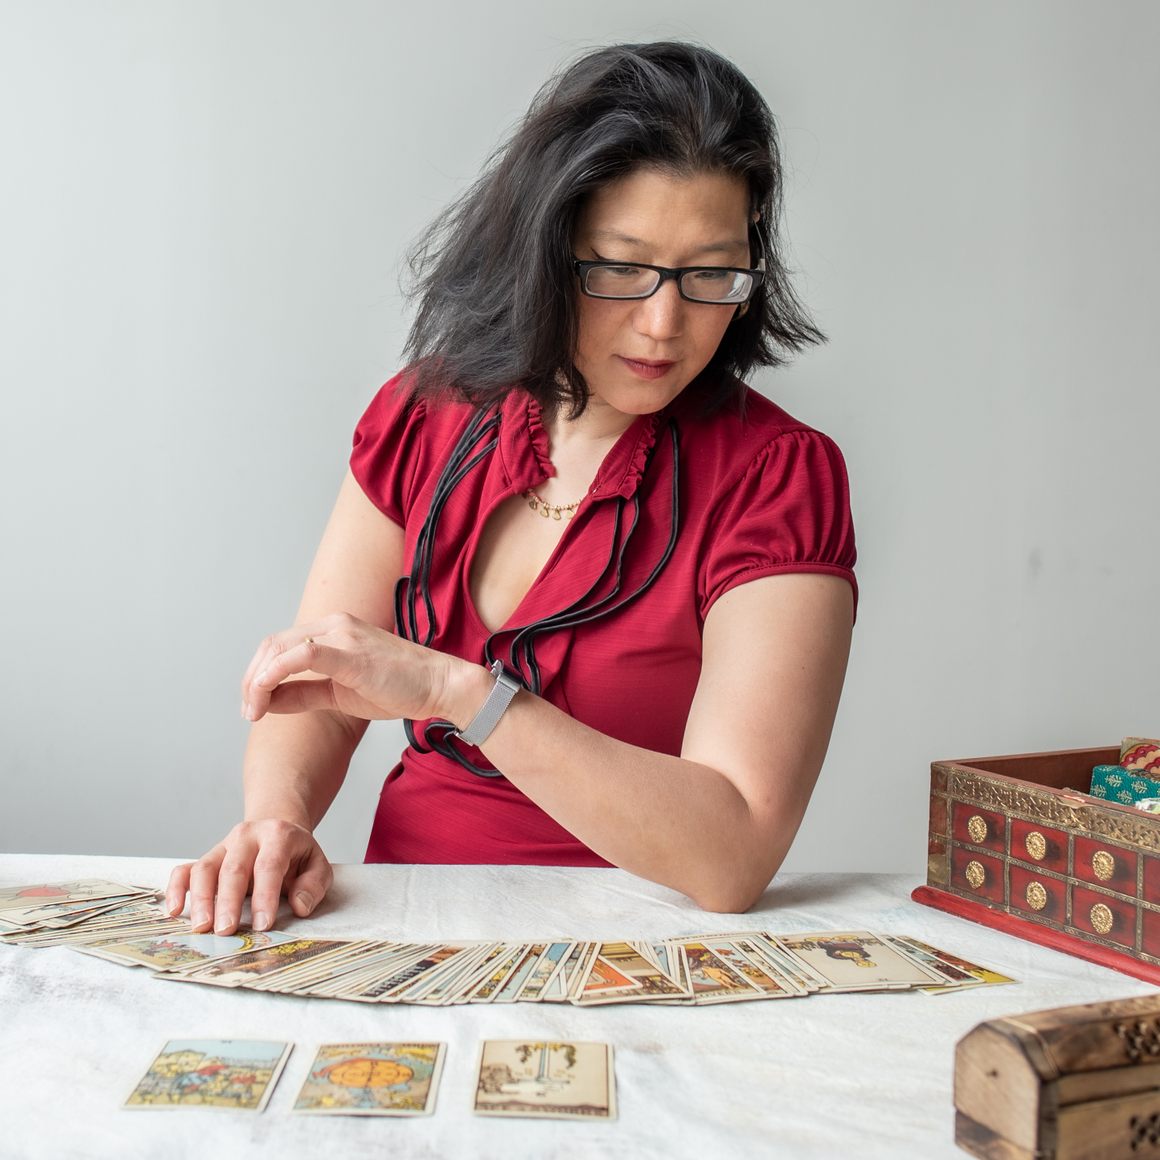 Three Tarot Readers Reveal the Secrets of Their Practice